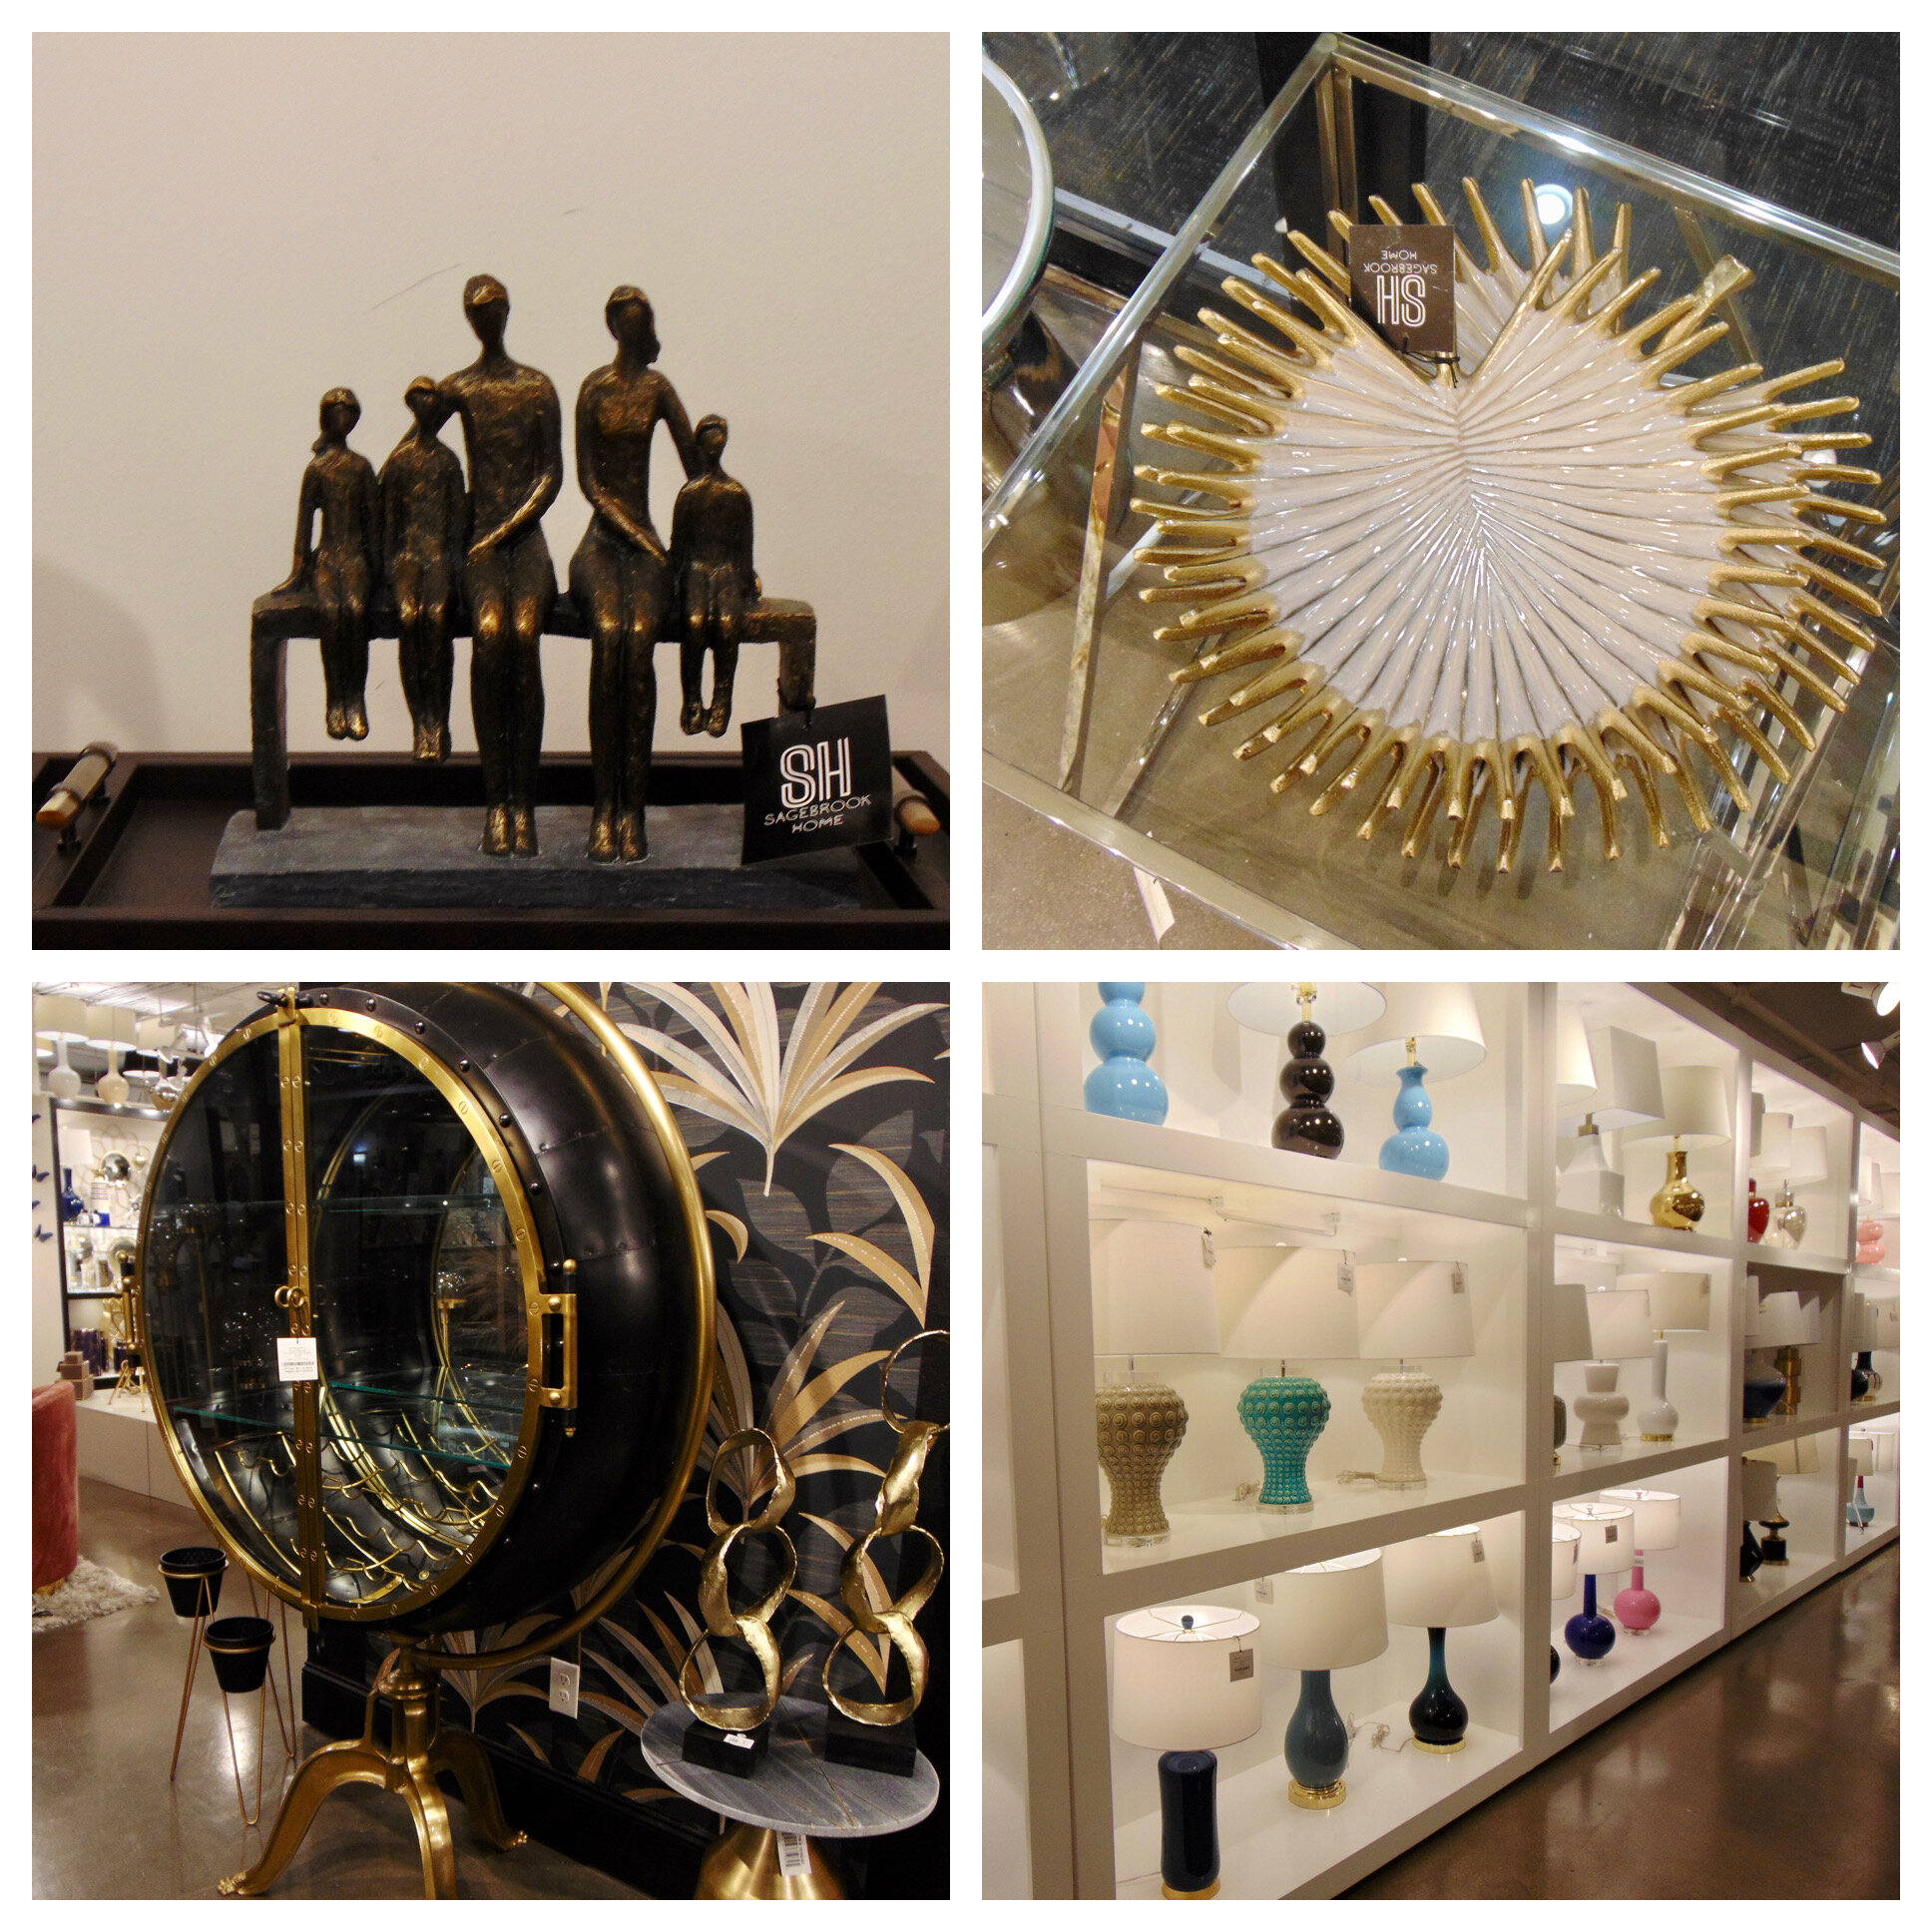 Clockwise, from top left. Summer intros and best-sellers at Sagebrook Home include family-themed metal sculptures and figurines, decorative metal leaf trays, Sagebrook’s “wall of lamps,” and  Nautical metal and glass bar cabinet, 78” high.   - 